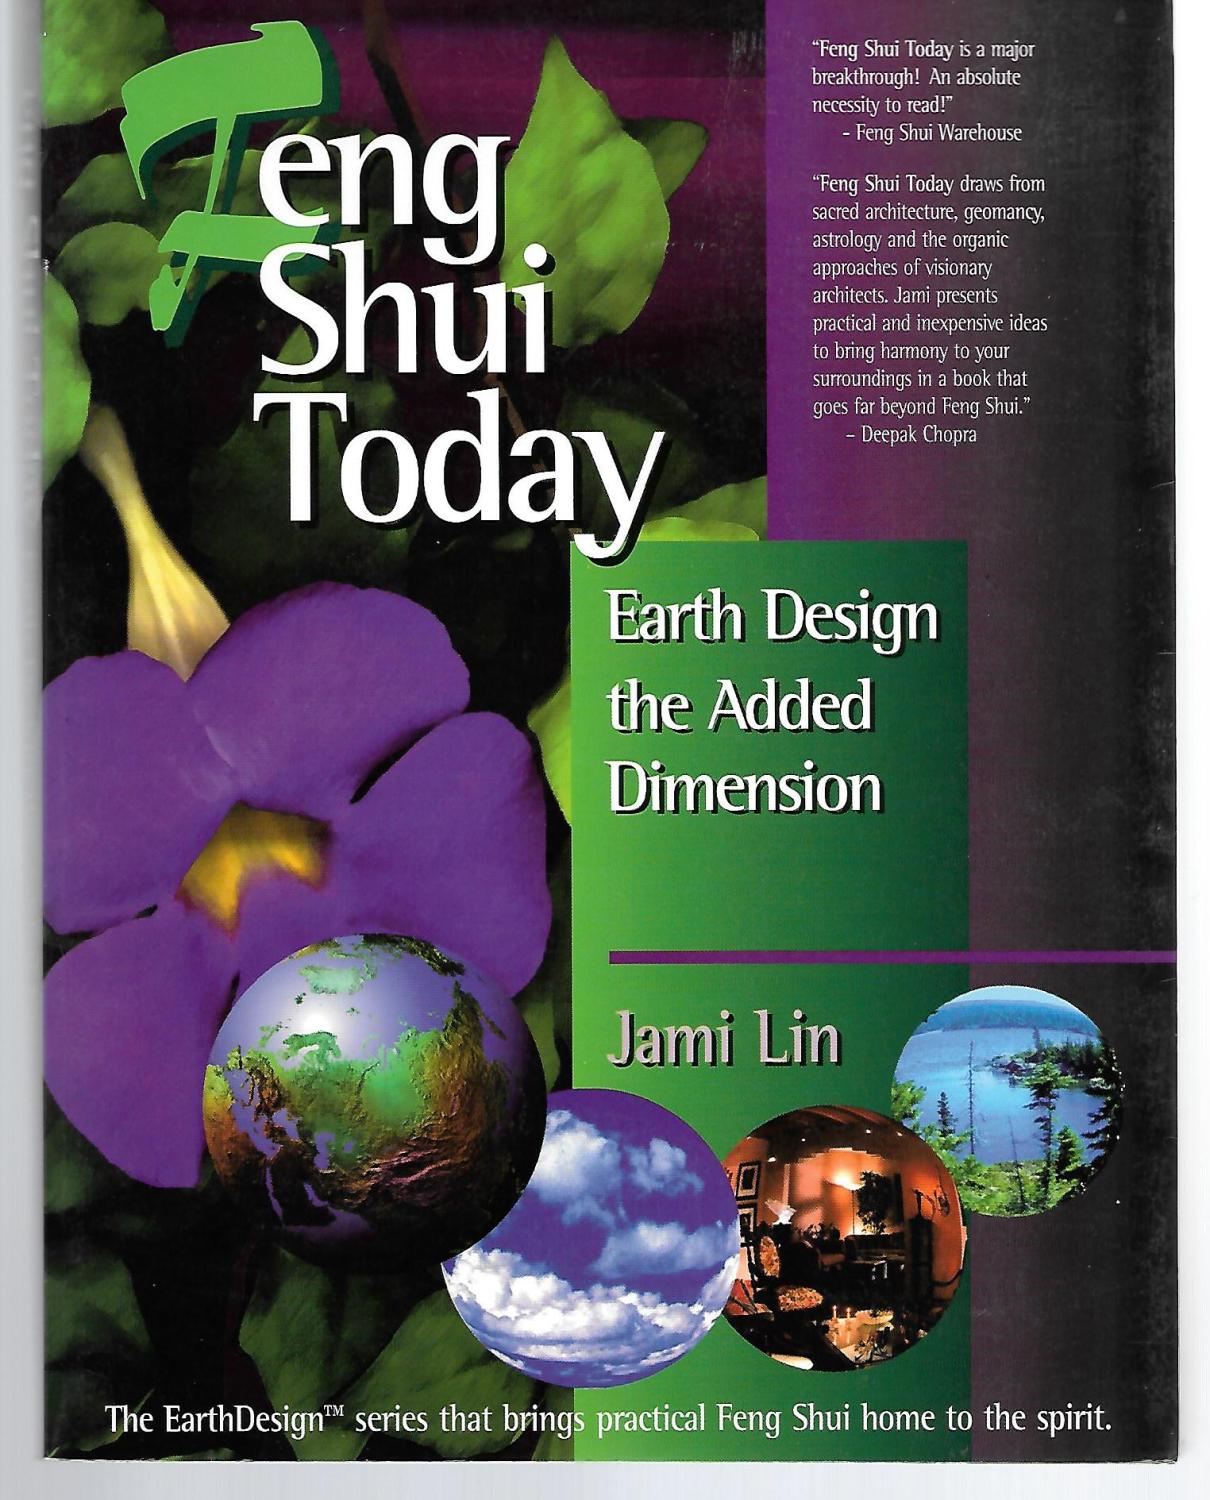 Feng Shui Today ( Earth Design The Added Dimension ) - Jami Lin